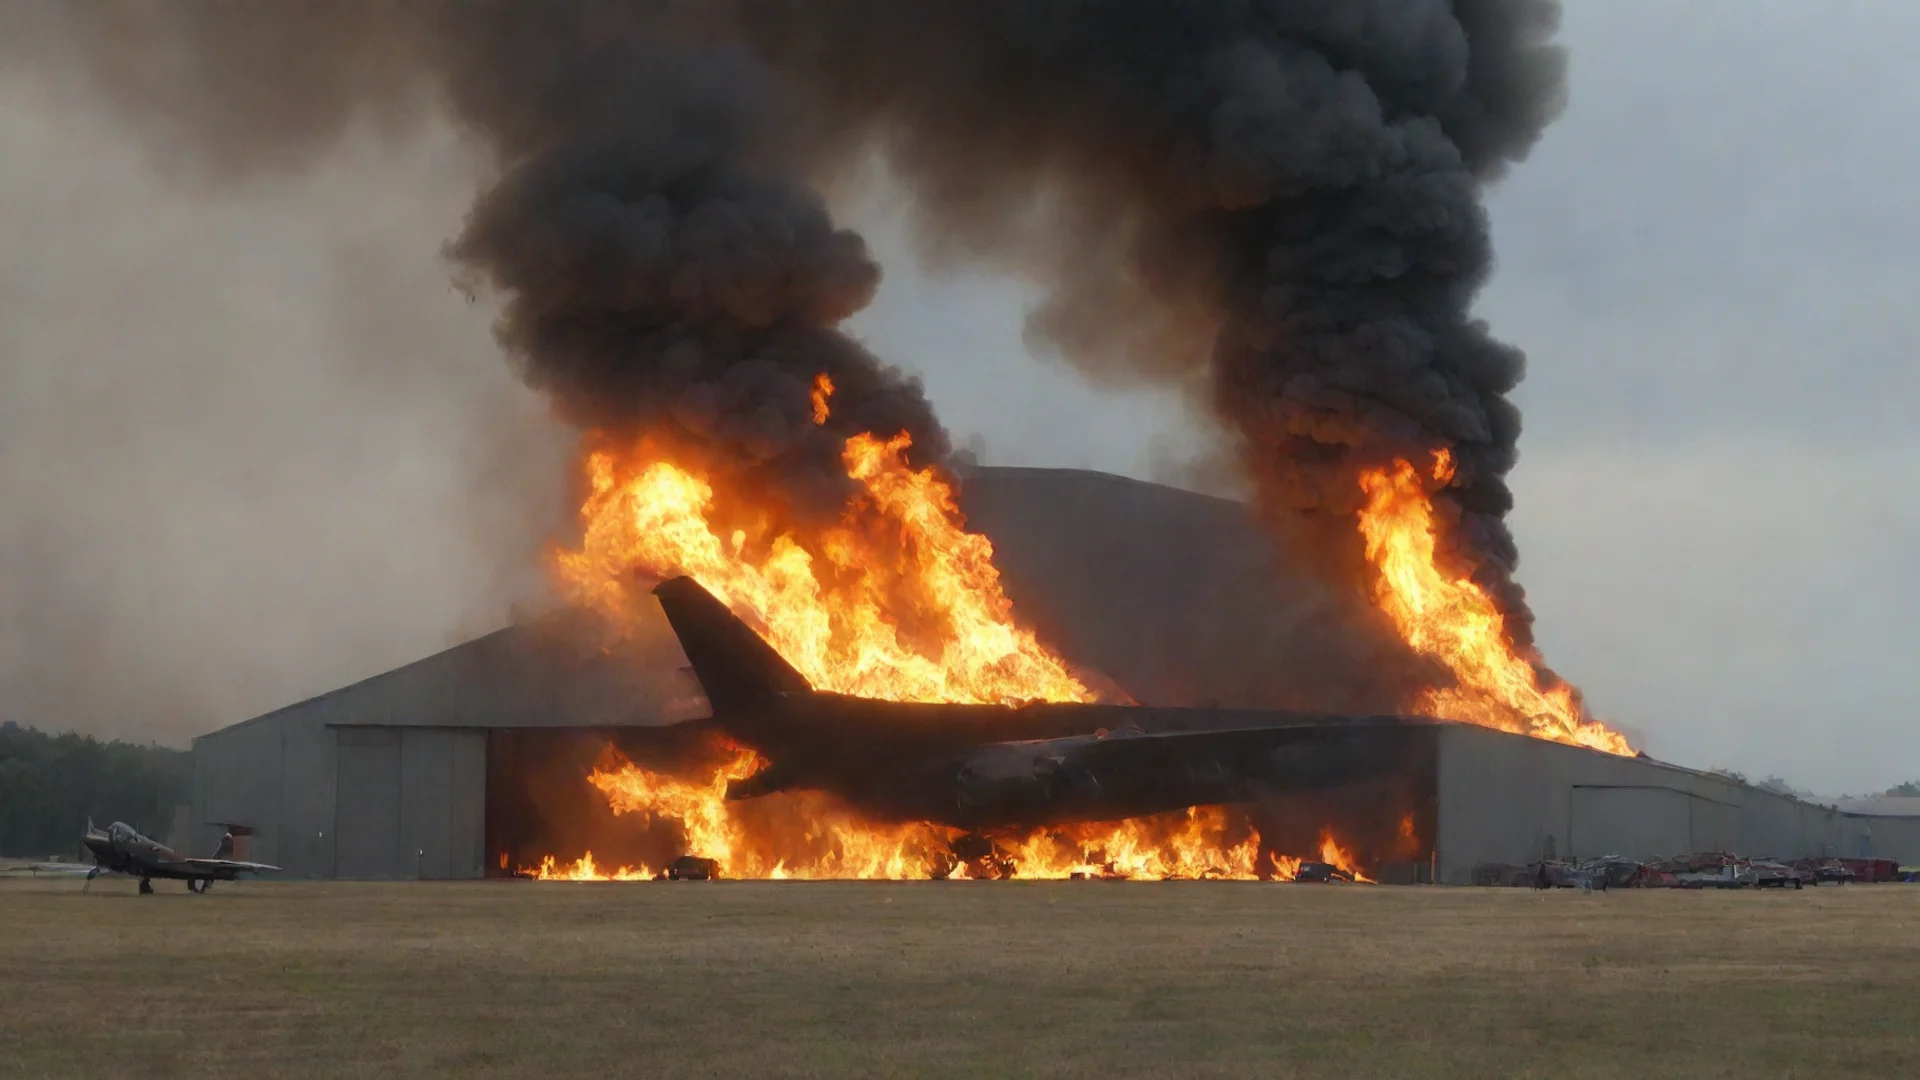 aiburning hangar with huge new aurplane in front wide